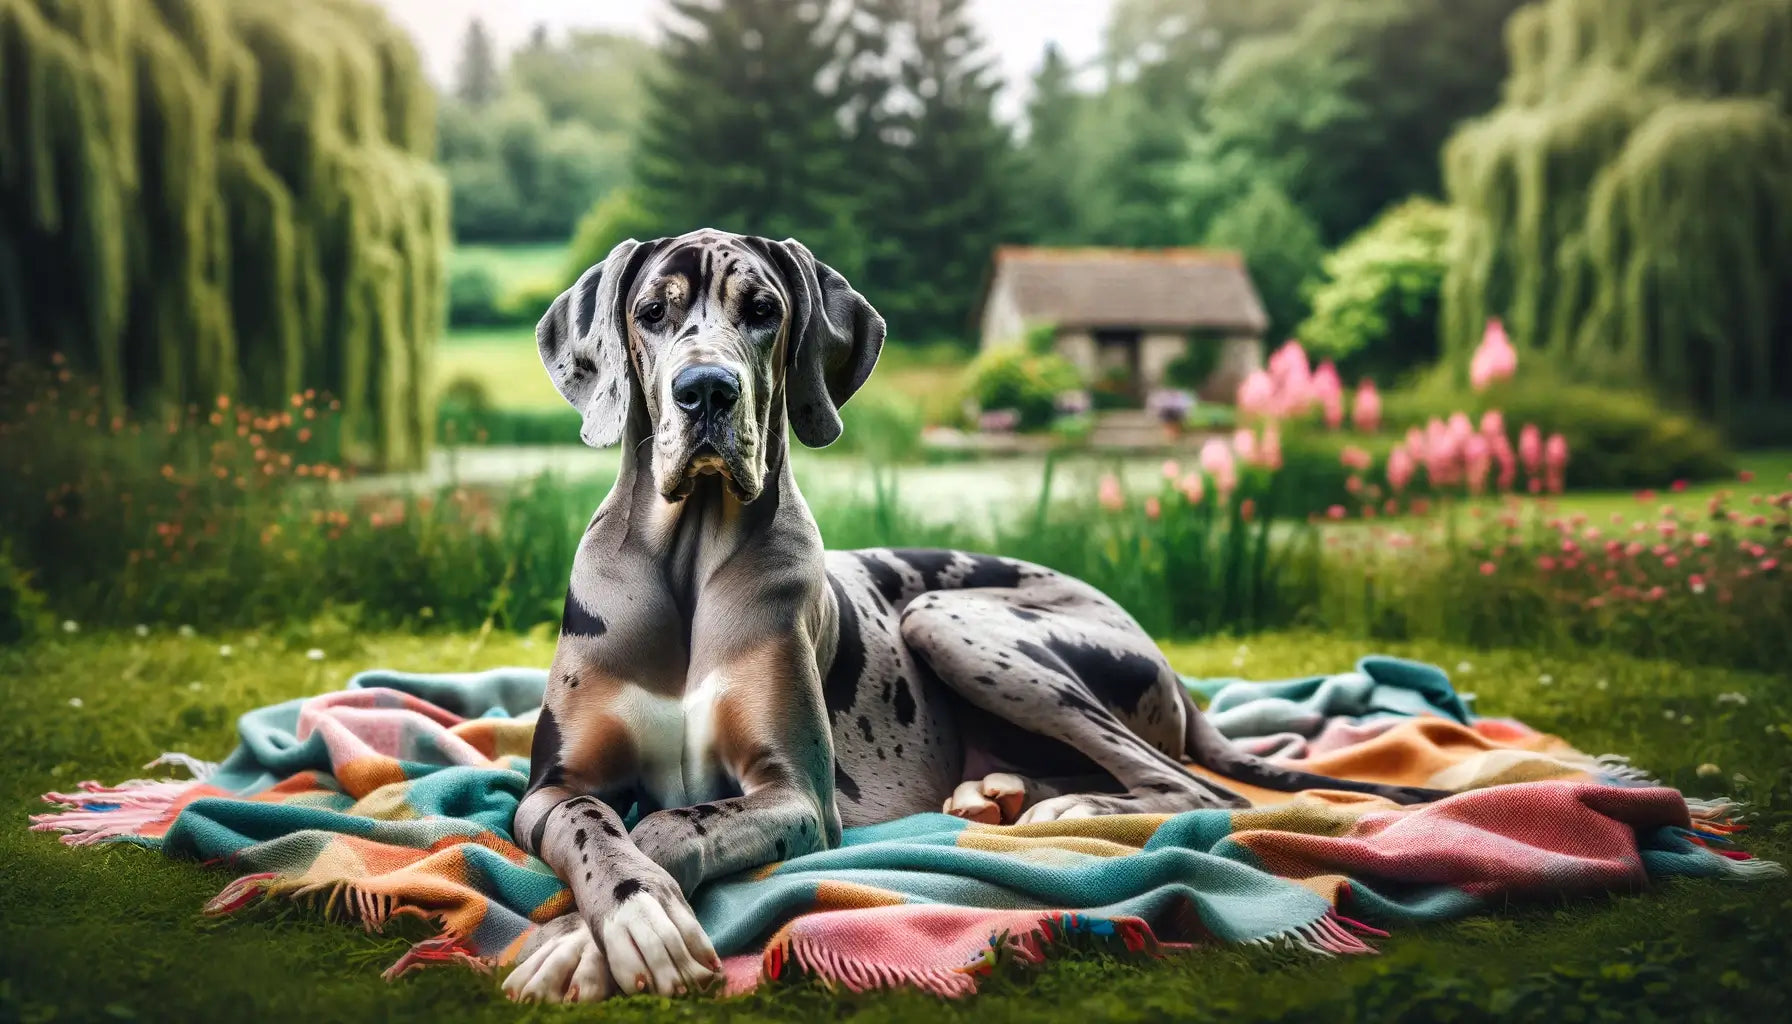 A Merle Great Dane on a blanket outdoors, set against a backdrop of natural greenery, showcasing its majestic size and distinctive coat.